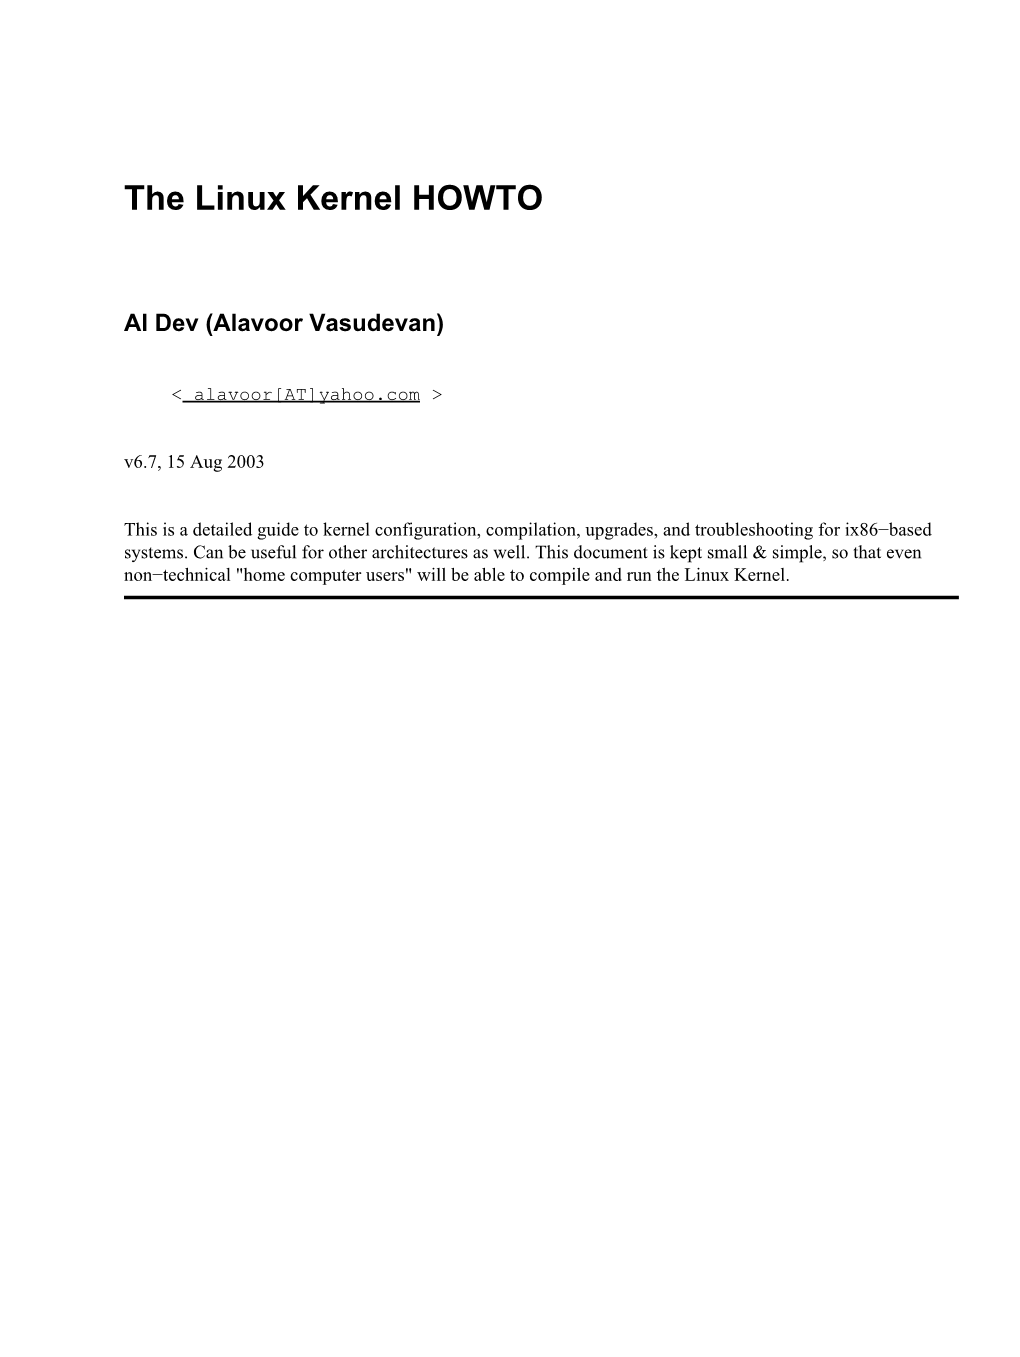 The Linux Kernel HOWTO